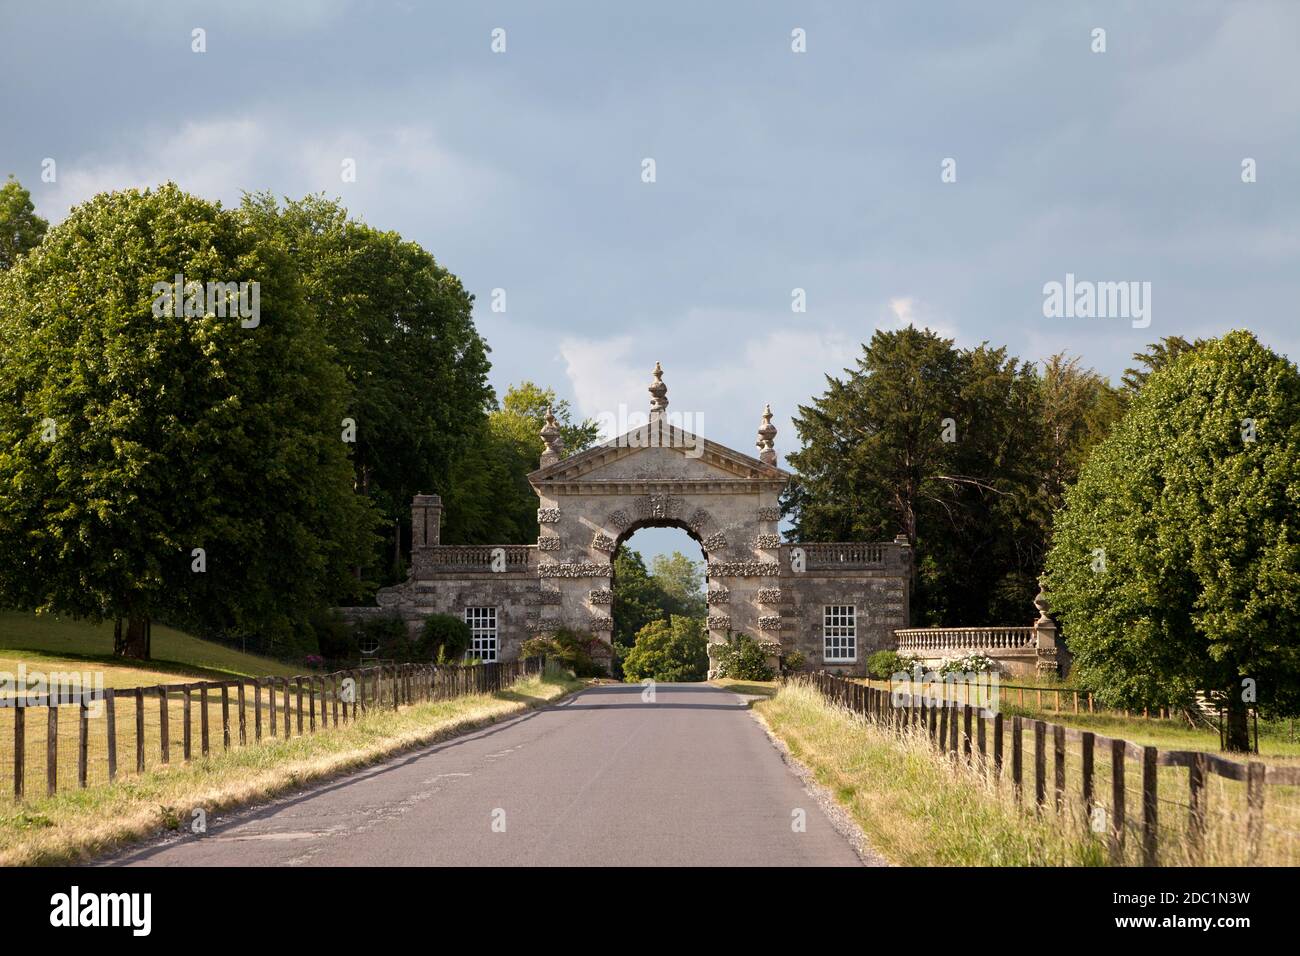 Fonthill Arch, the gateway to Fonthill Park, at Fonthill Bishop in Wiltshire. Stock Photo